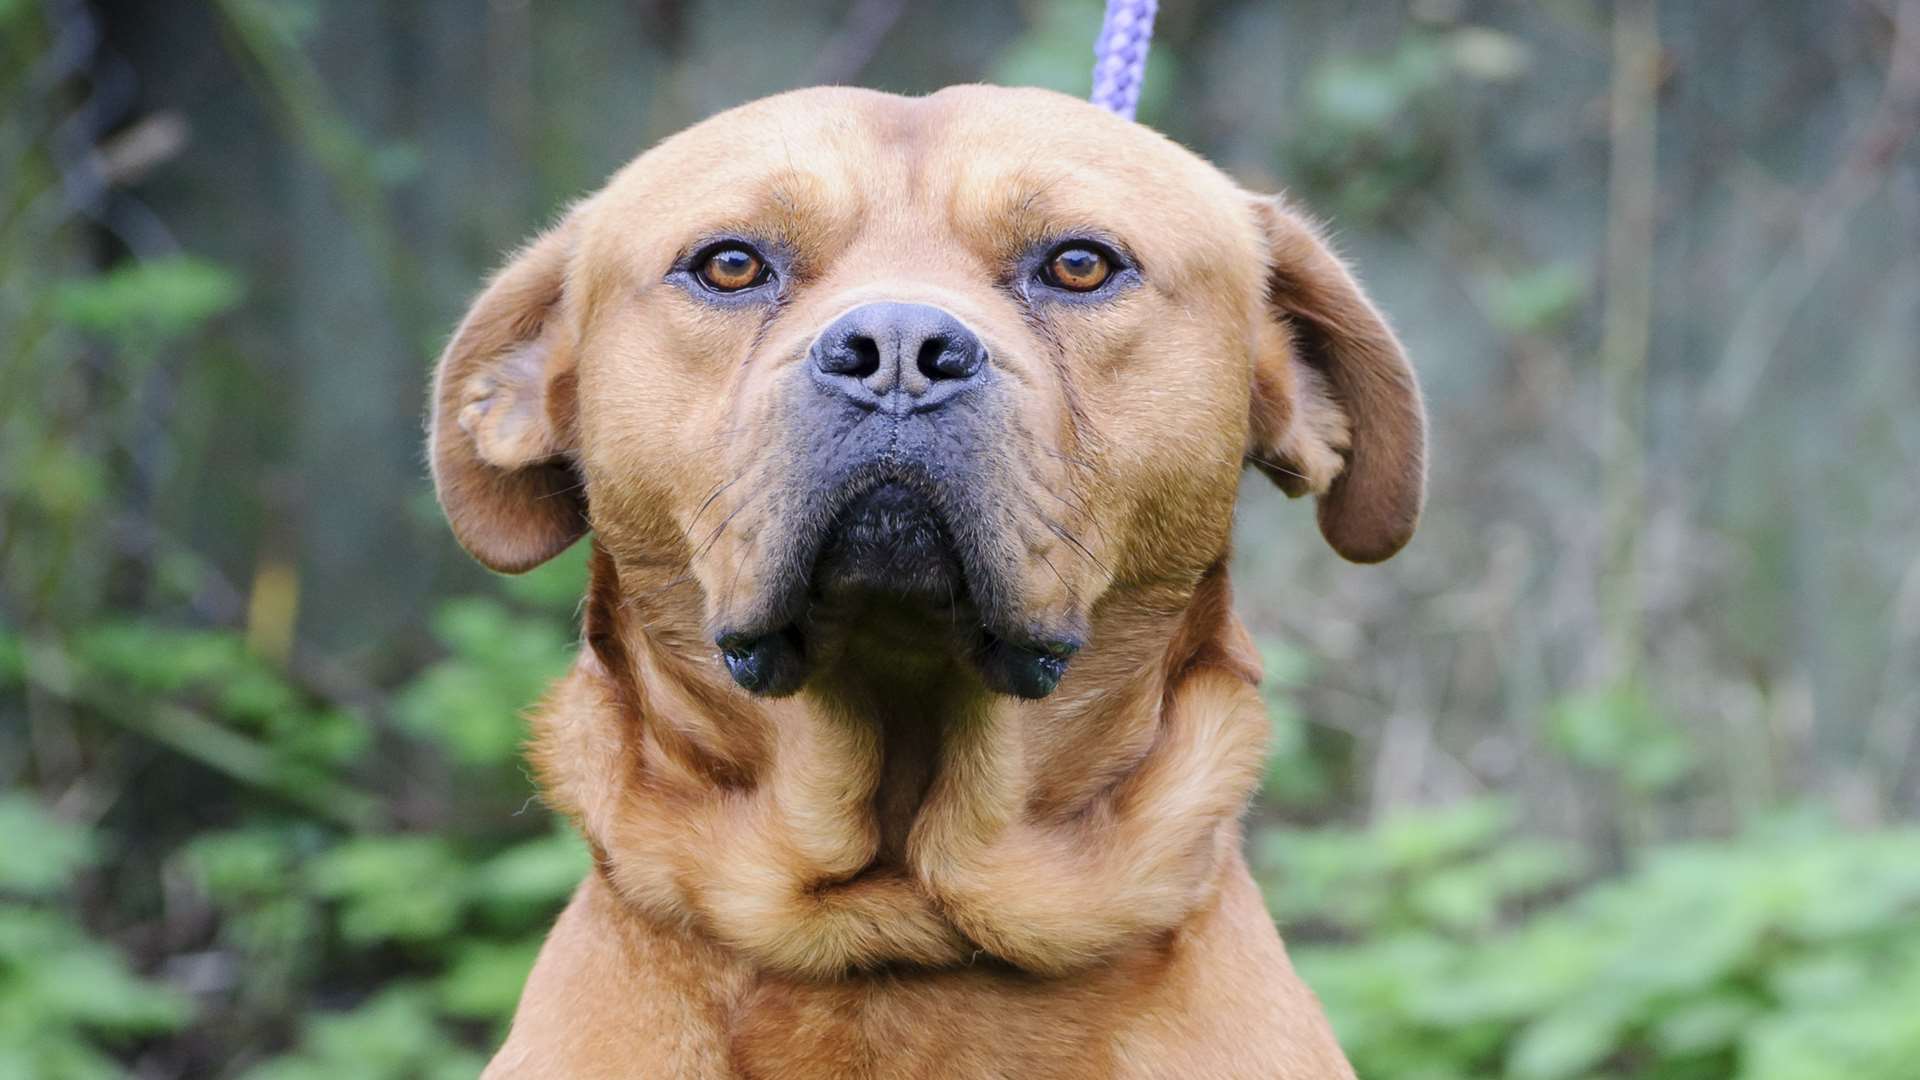 Sherbet, a male Mastiff cross, aged between 3 and 5 years.